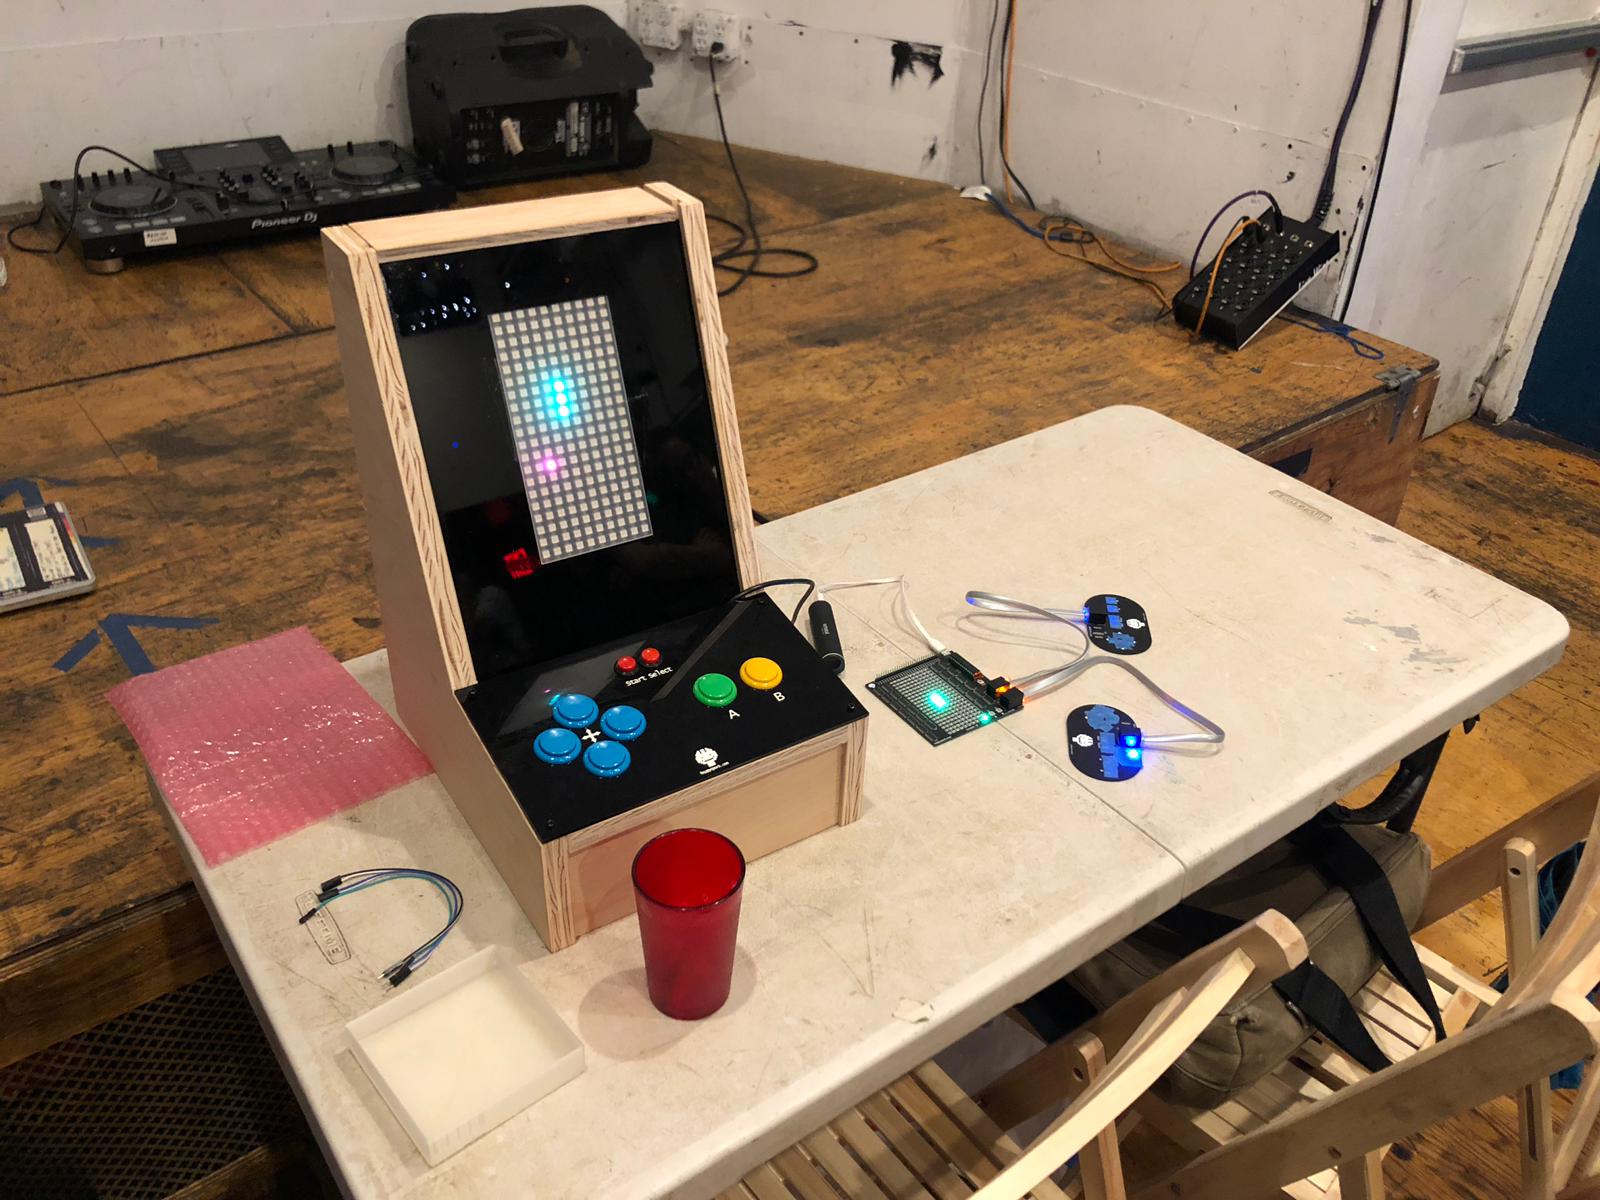 Mini arcade machine that give you selection of classic games.